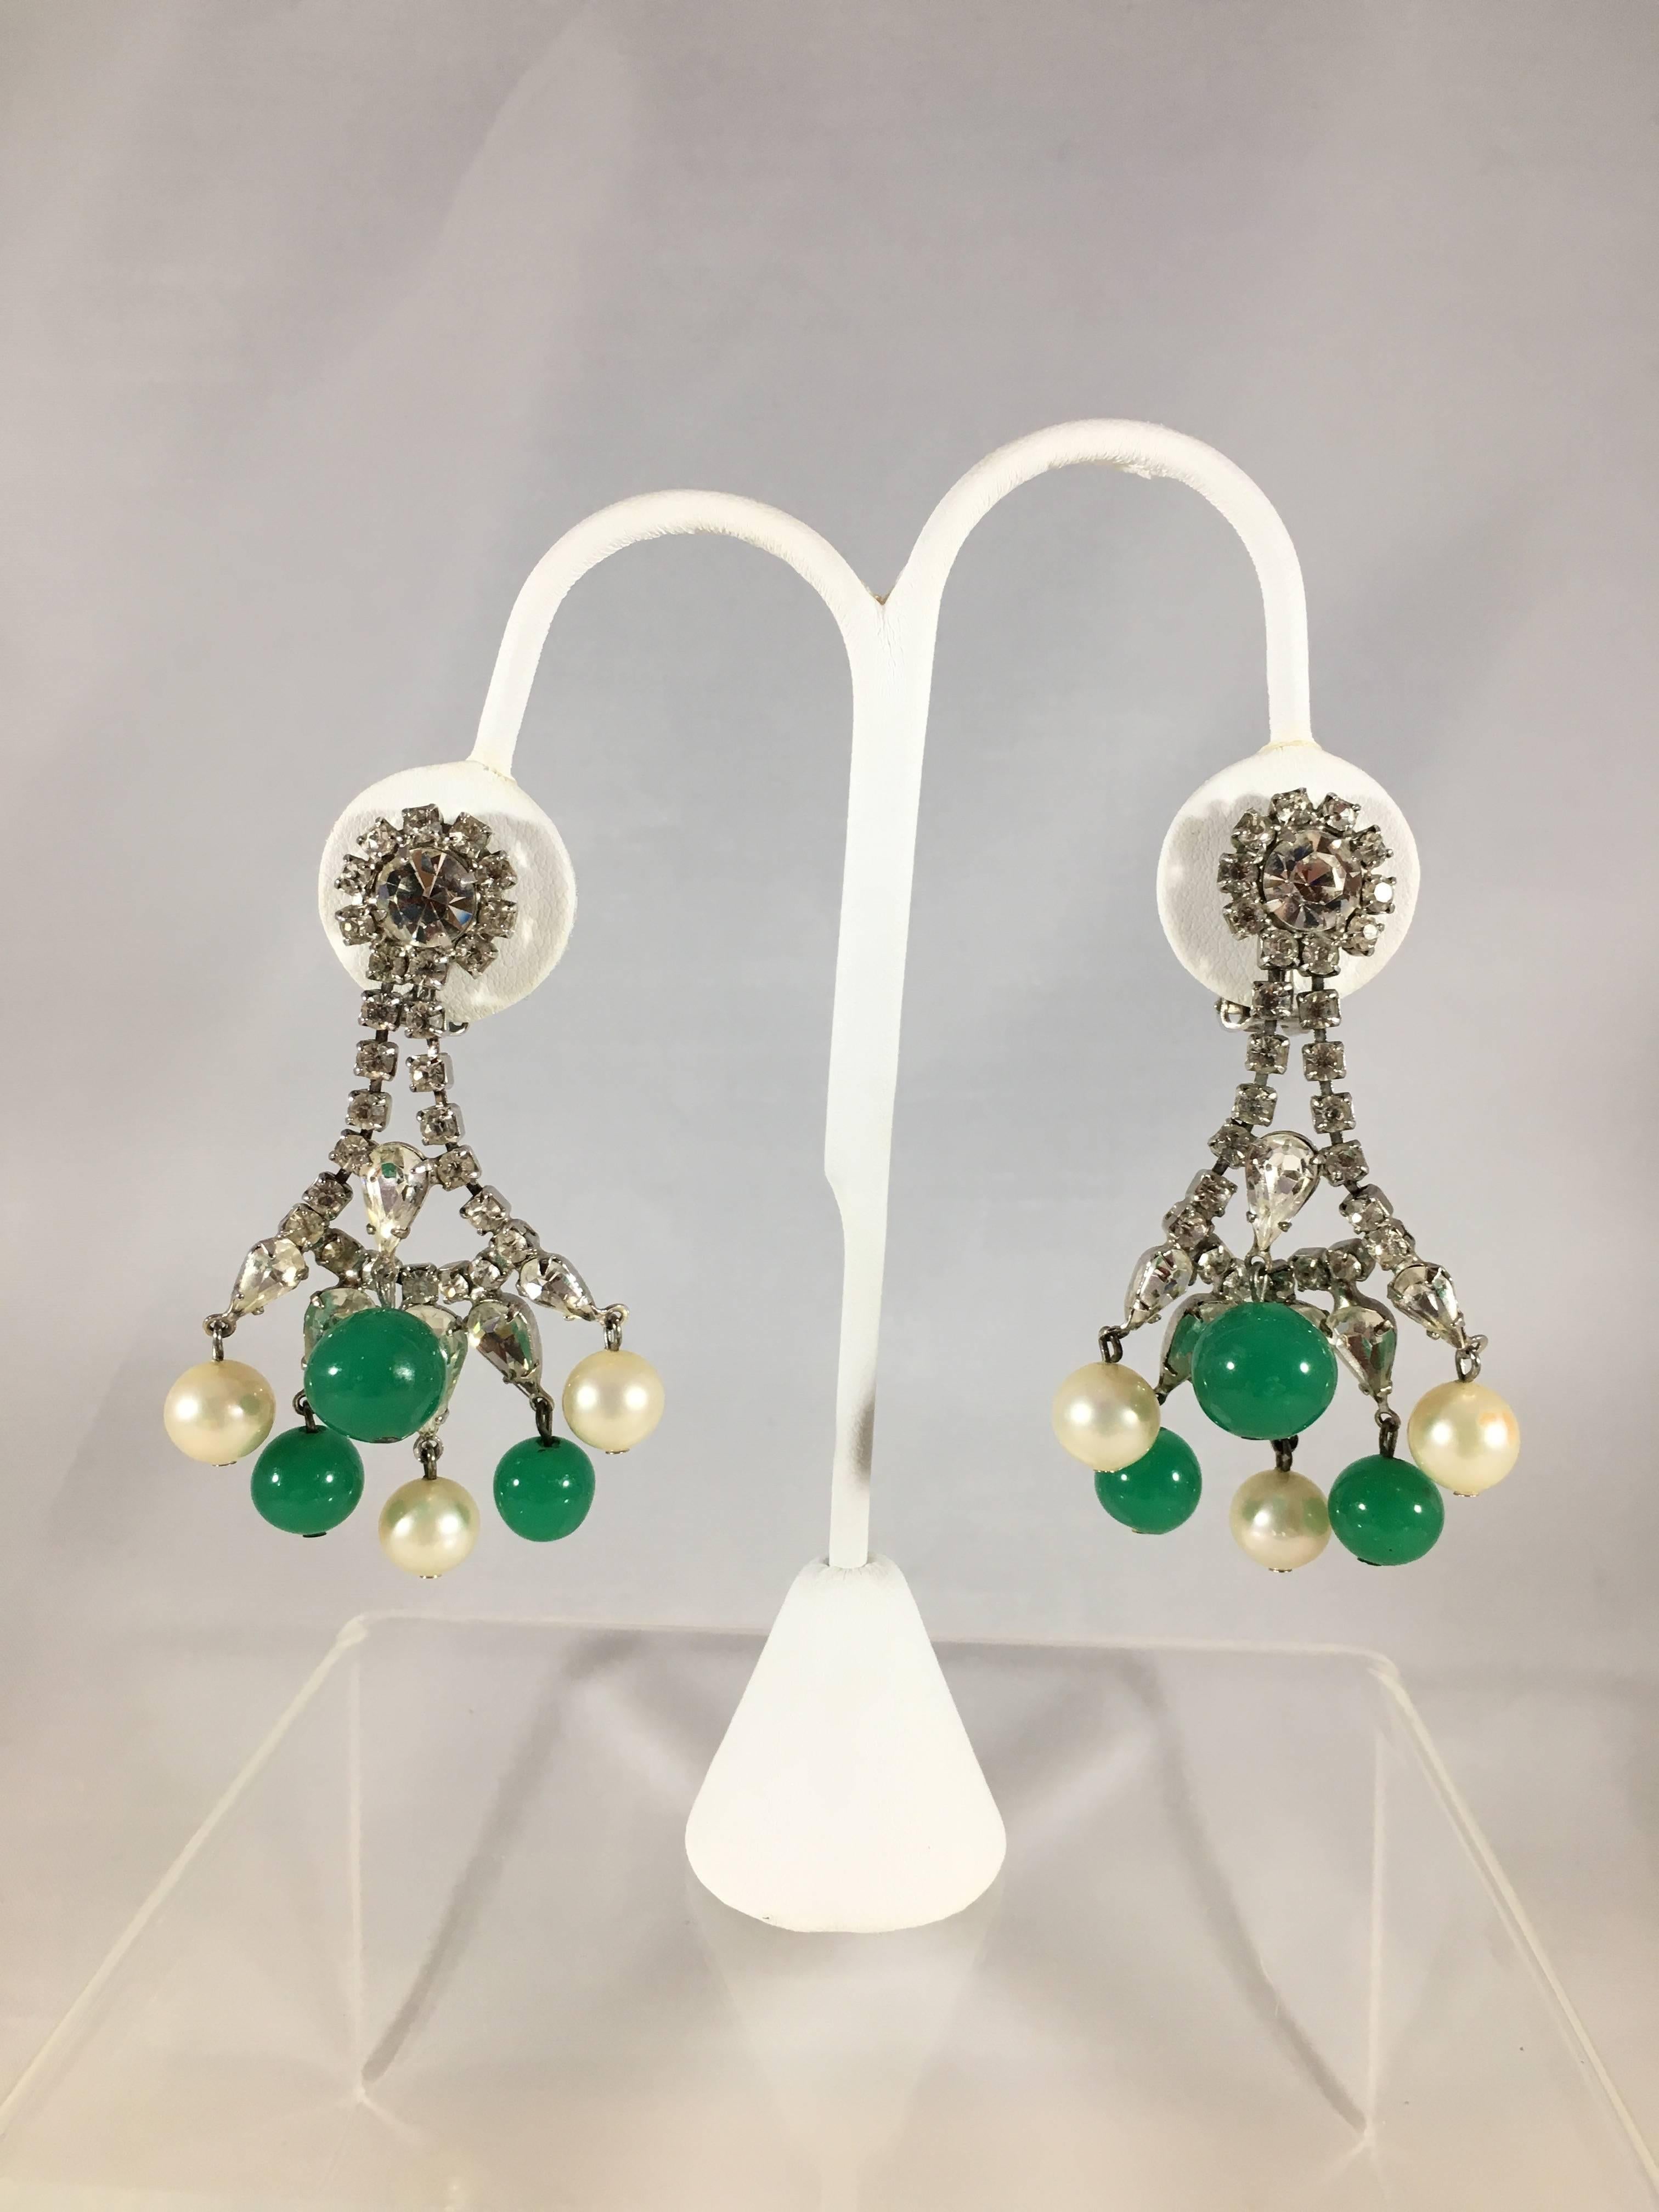 Hattie Carnegie 60s Chandelier Earrings with Rhinestones, Pearls and Emeralds In Excellent Condition For Sale In Chicago, IL